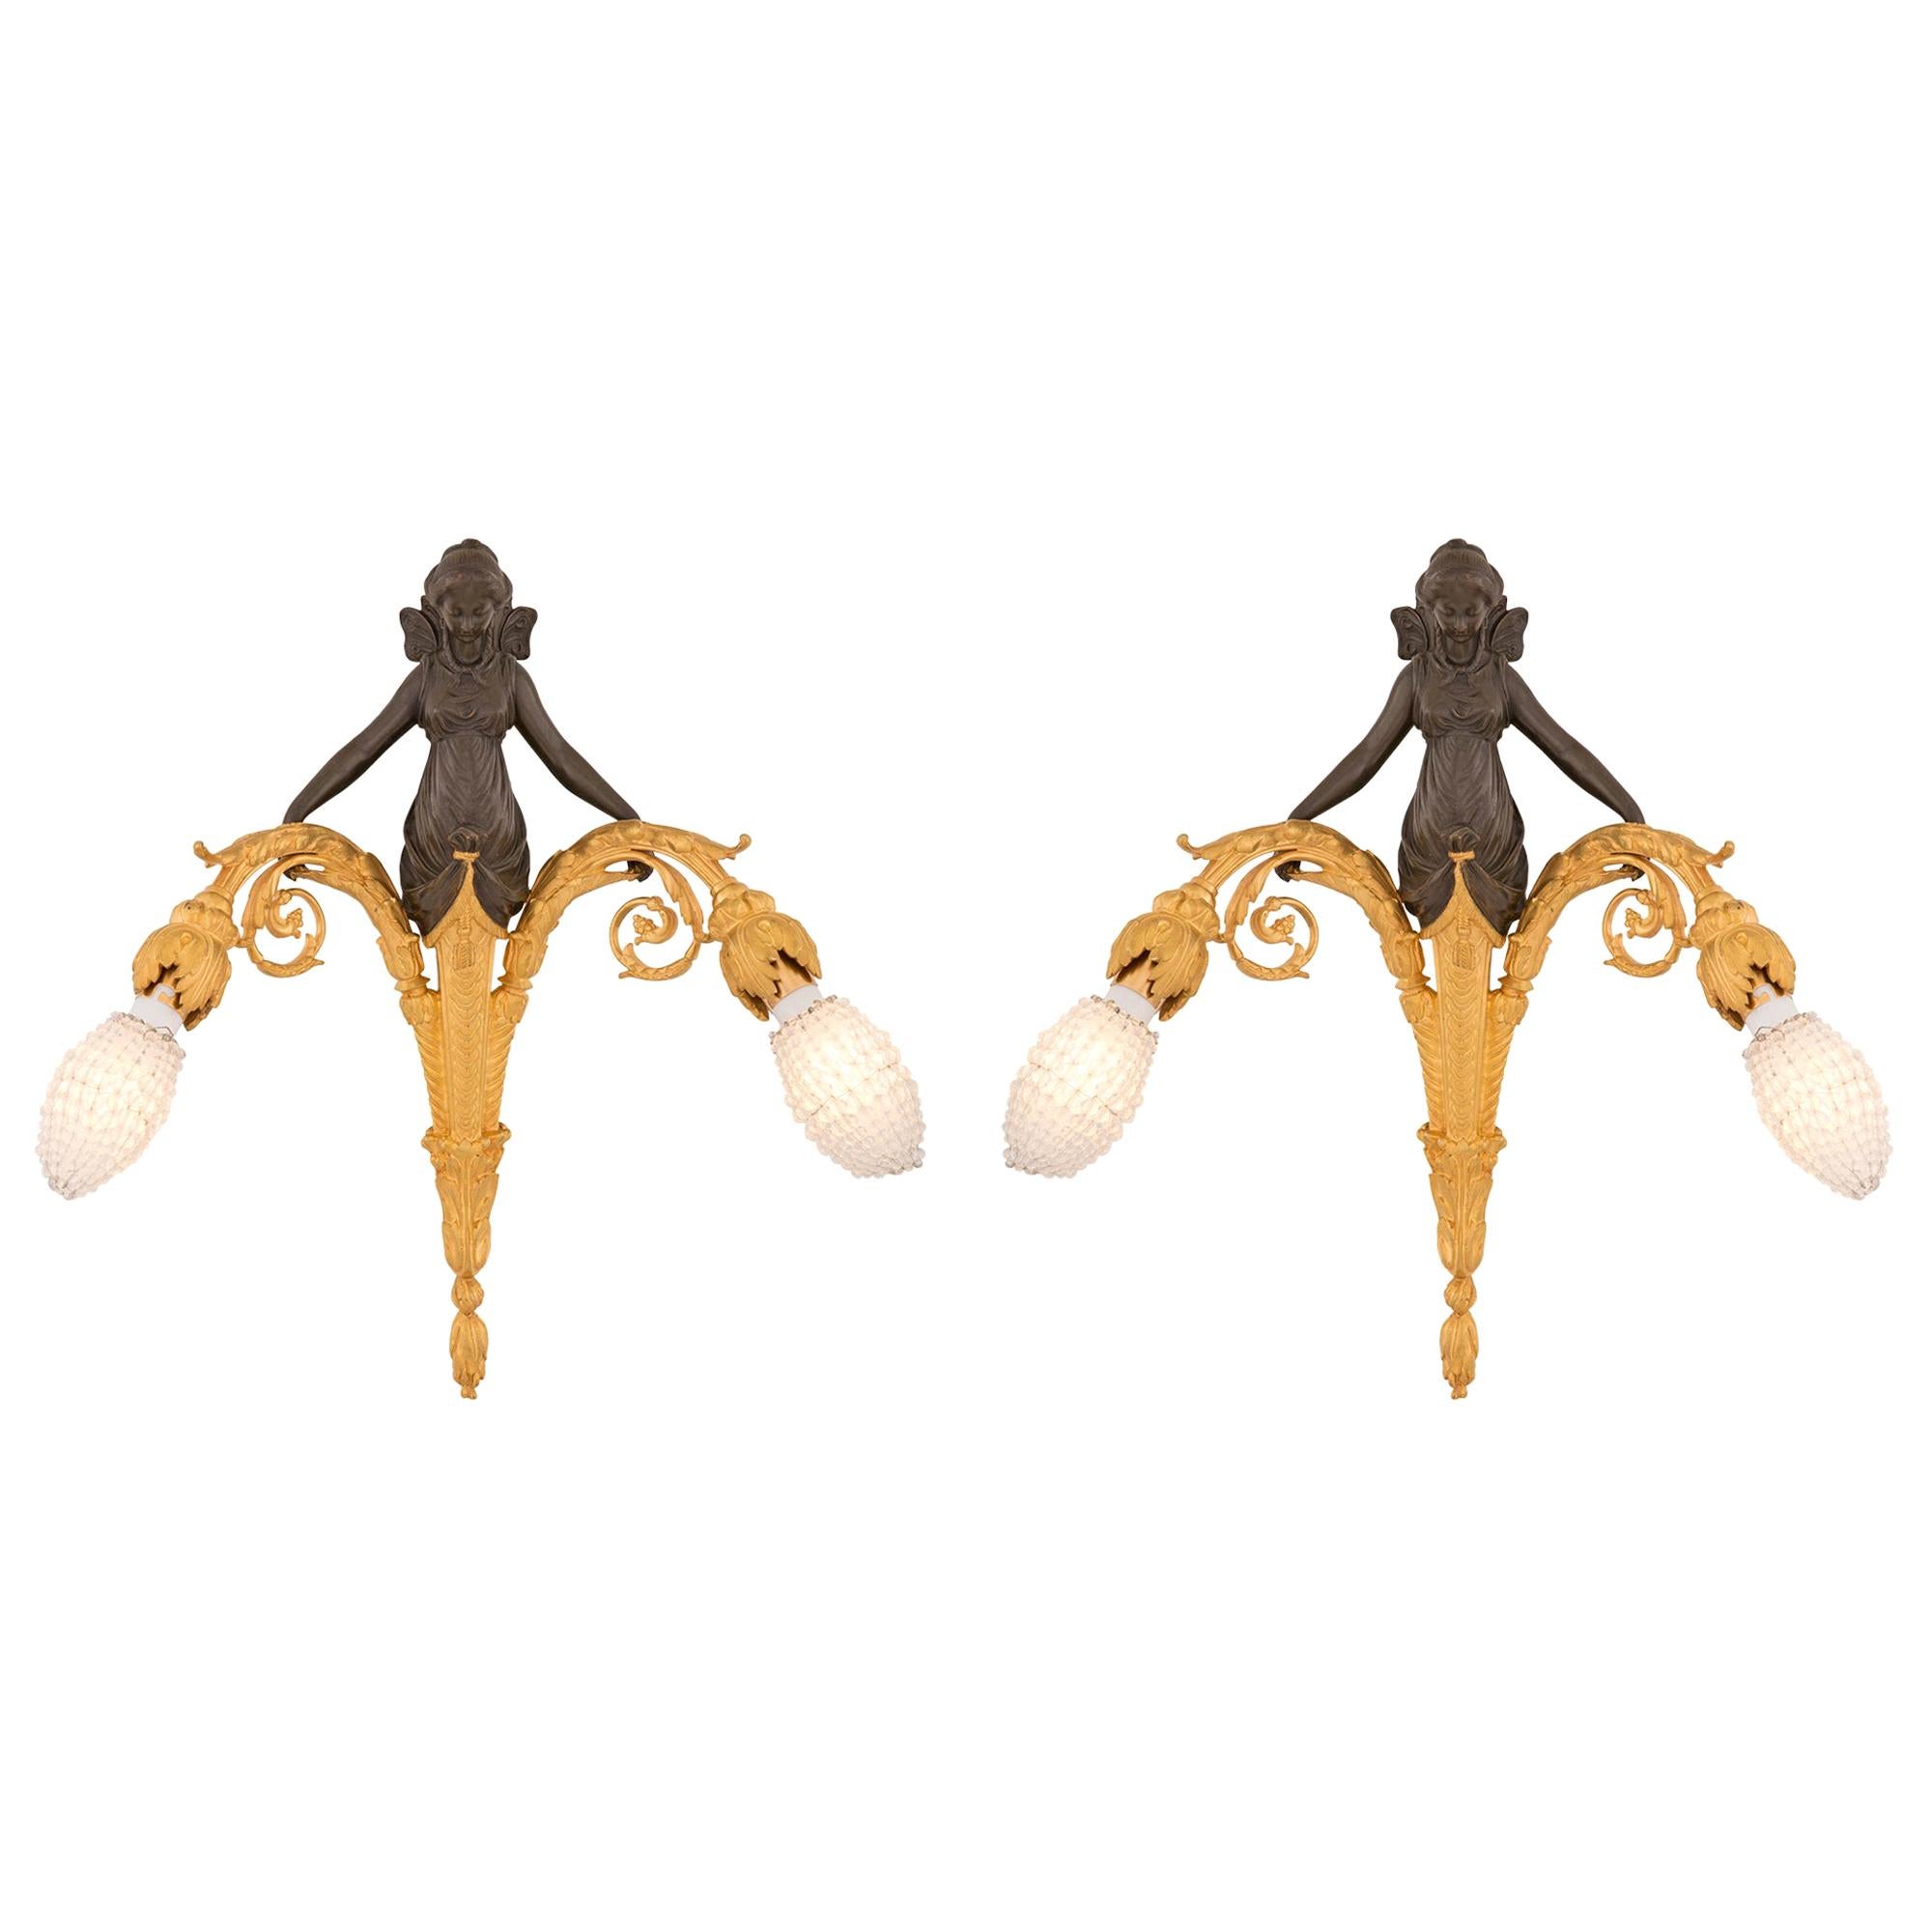 Pair of French 19th Century Neo-Classical St. Bronze and Ormolu Sconces